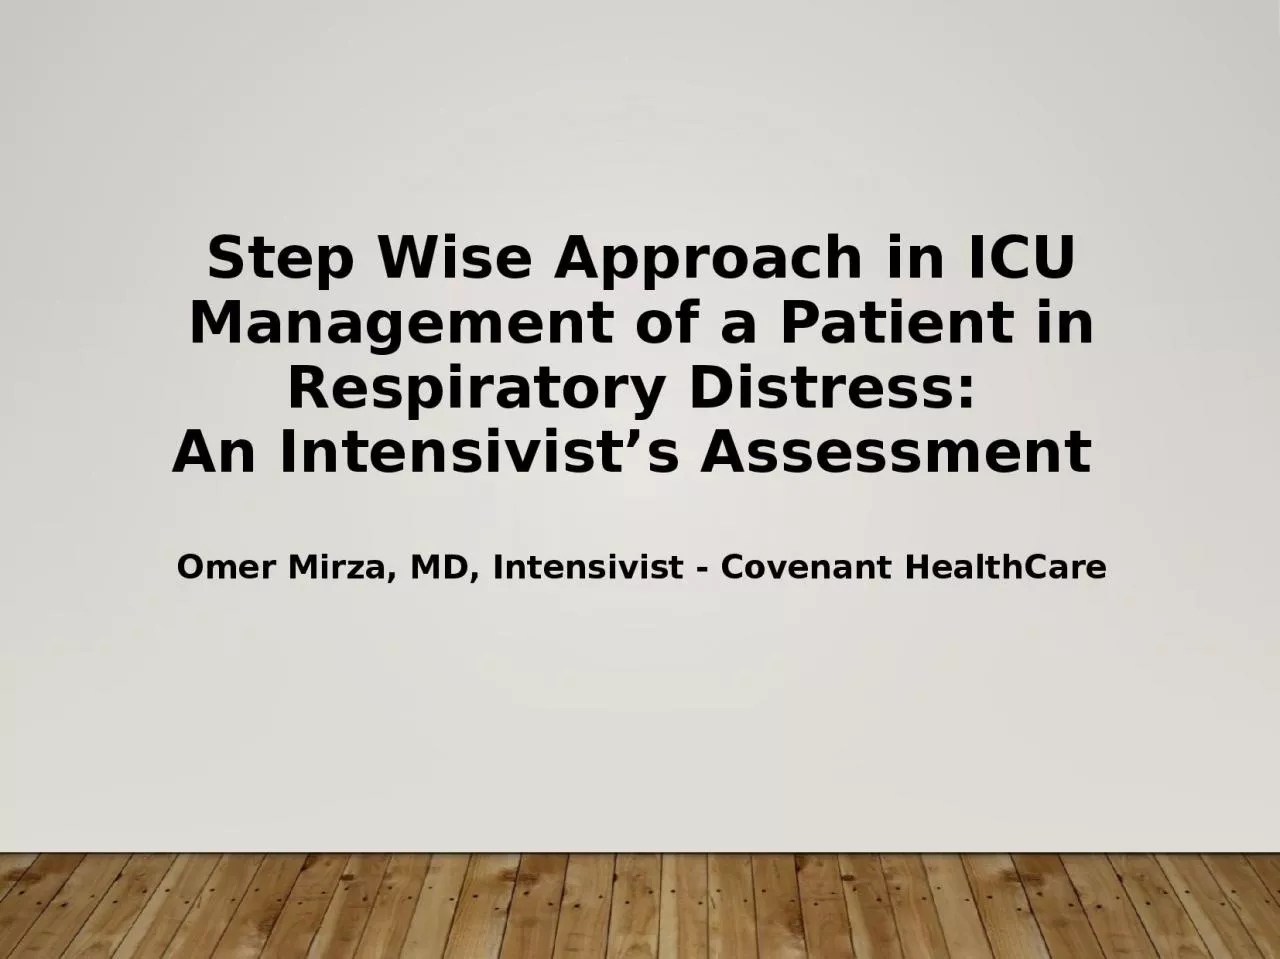 Step Wise Approach in ICU Management of a Patient in Respiratory Distress: